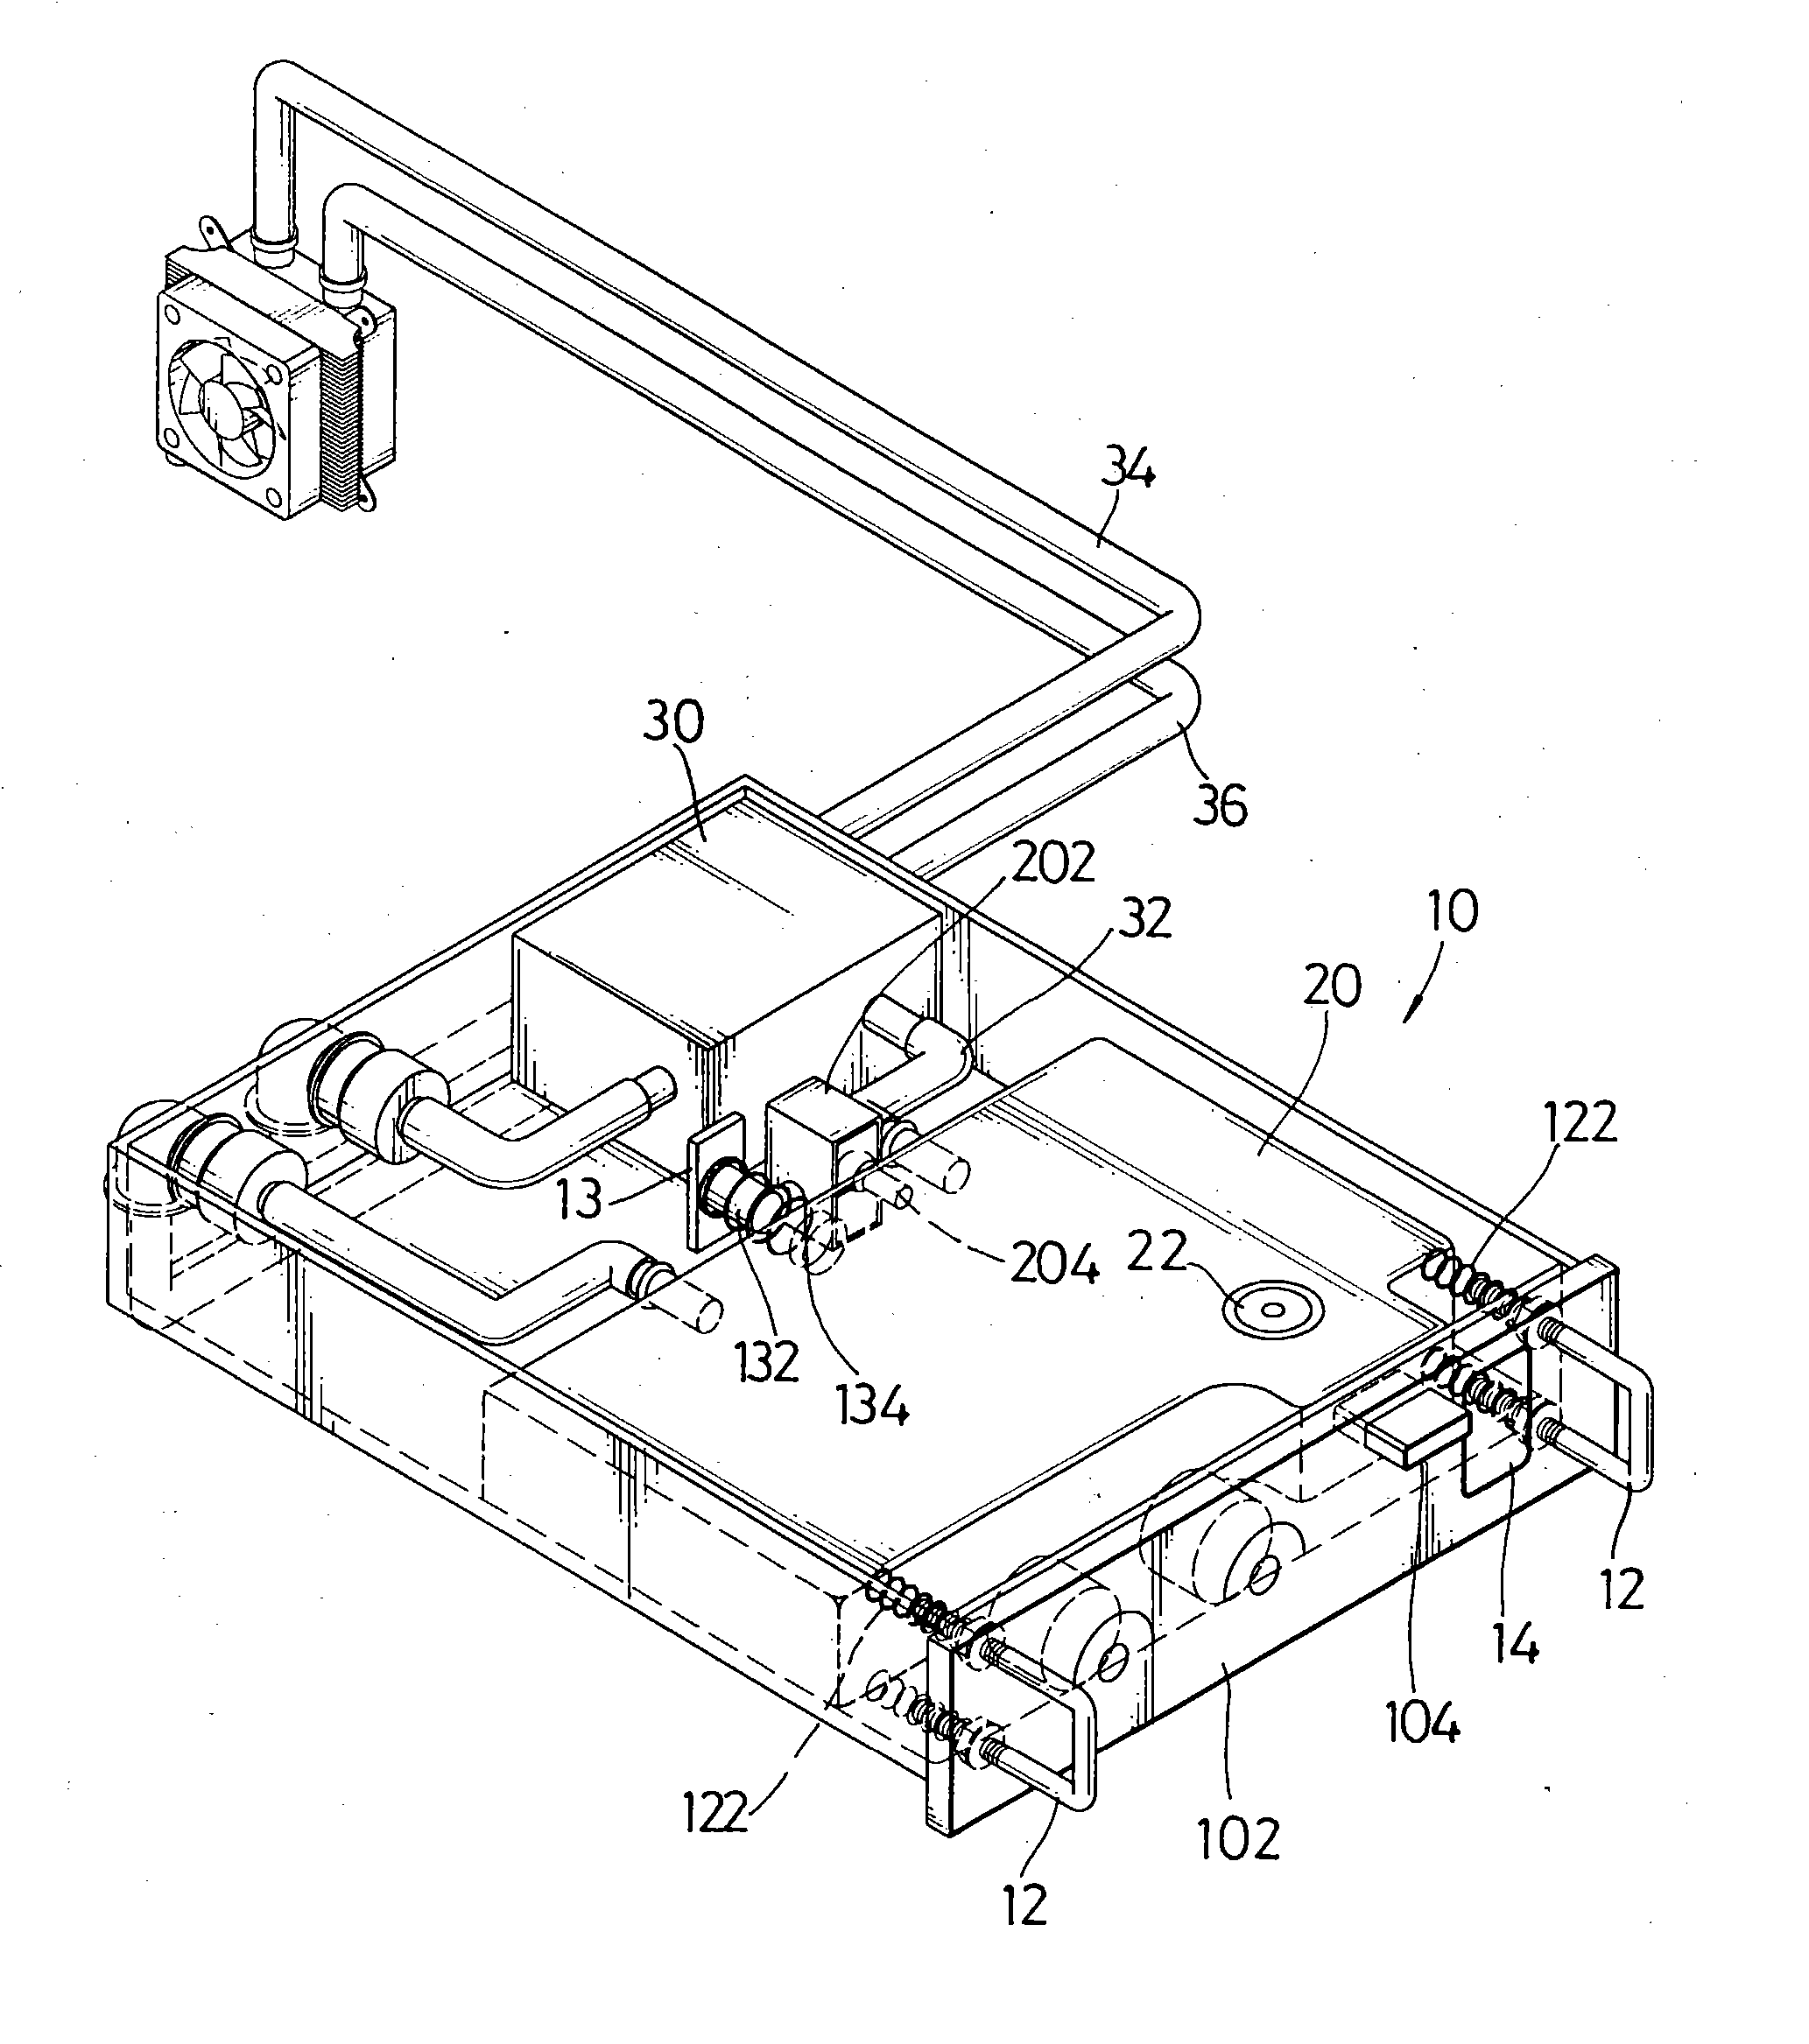 Cartridge assembly of a water cooled radiator